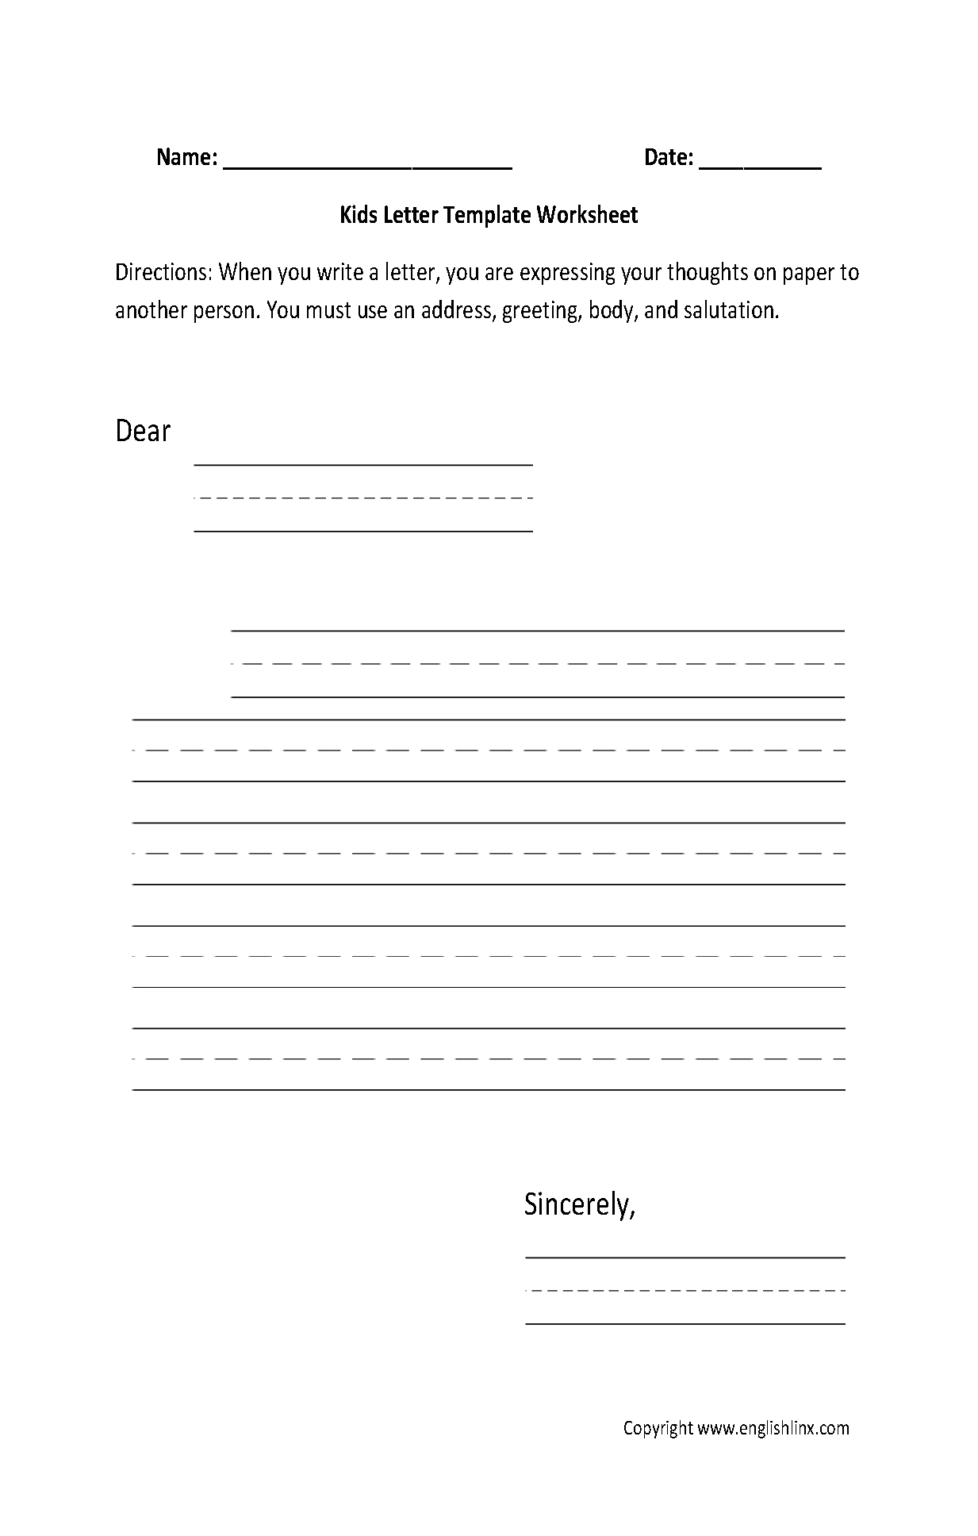 writing-worksheets-letter-writing-worksheets-with-letter-writing